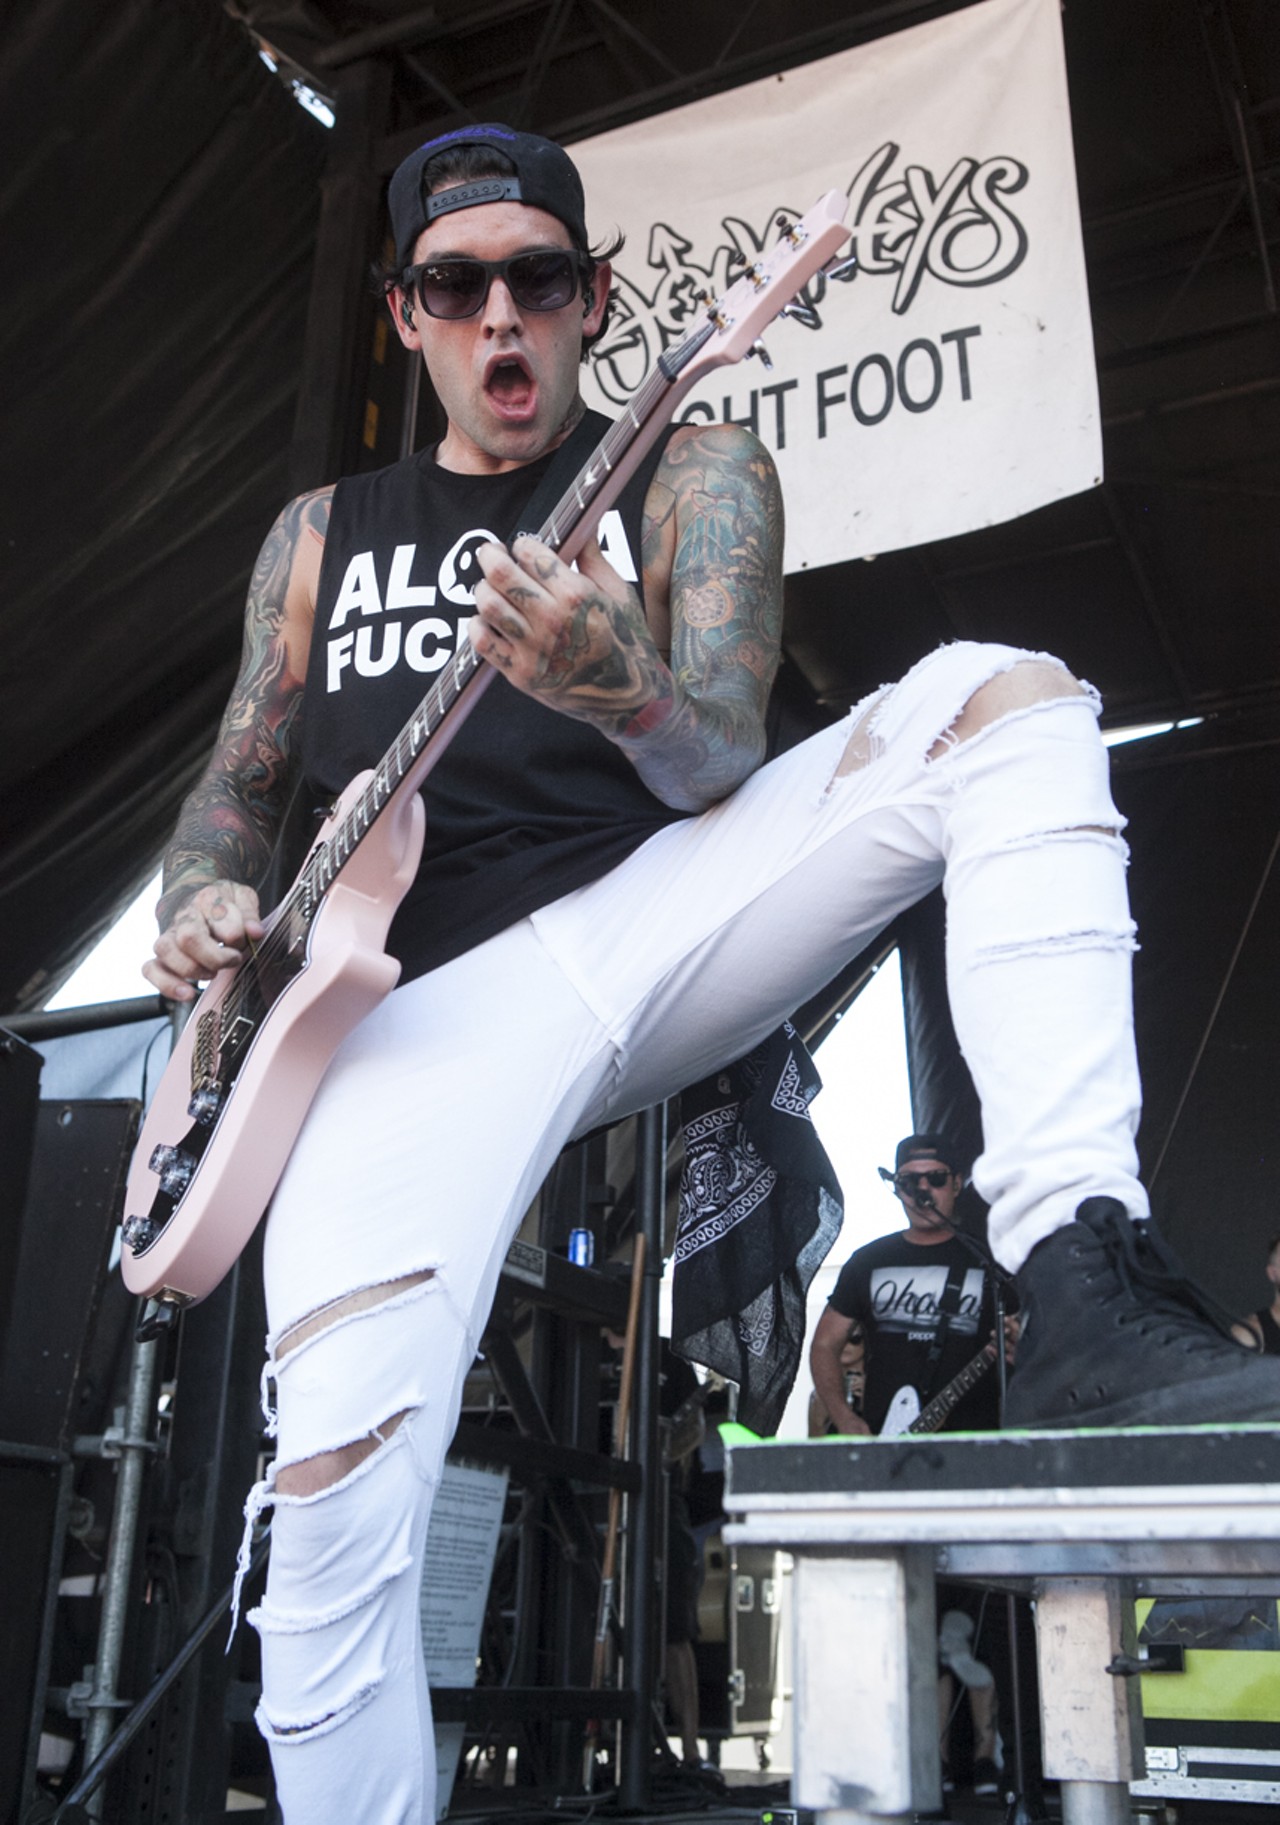 41 photos of Warped Tour at the Palace of Auburn Hills